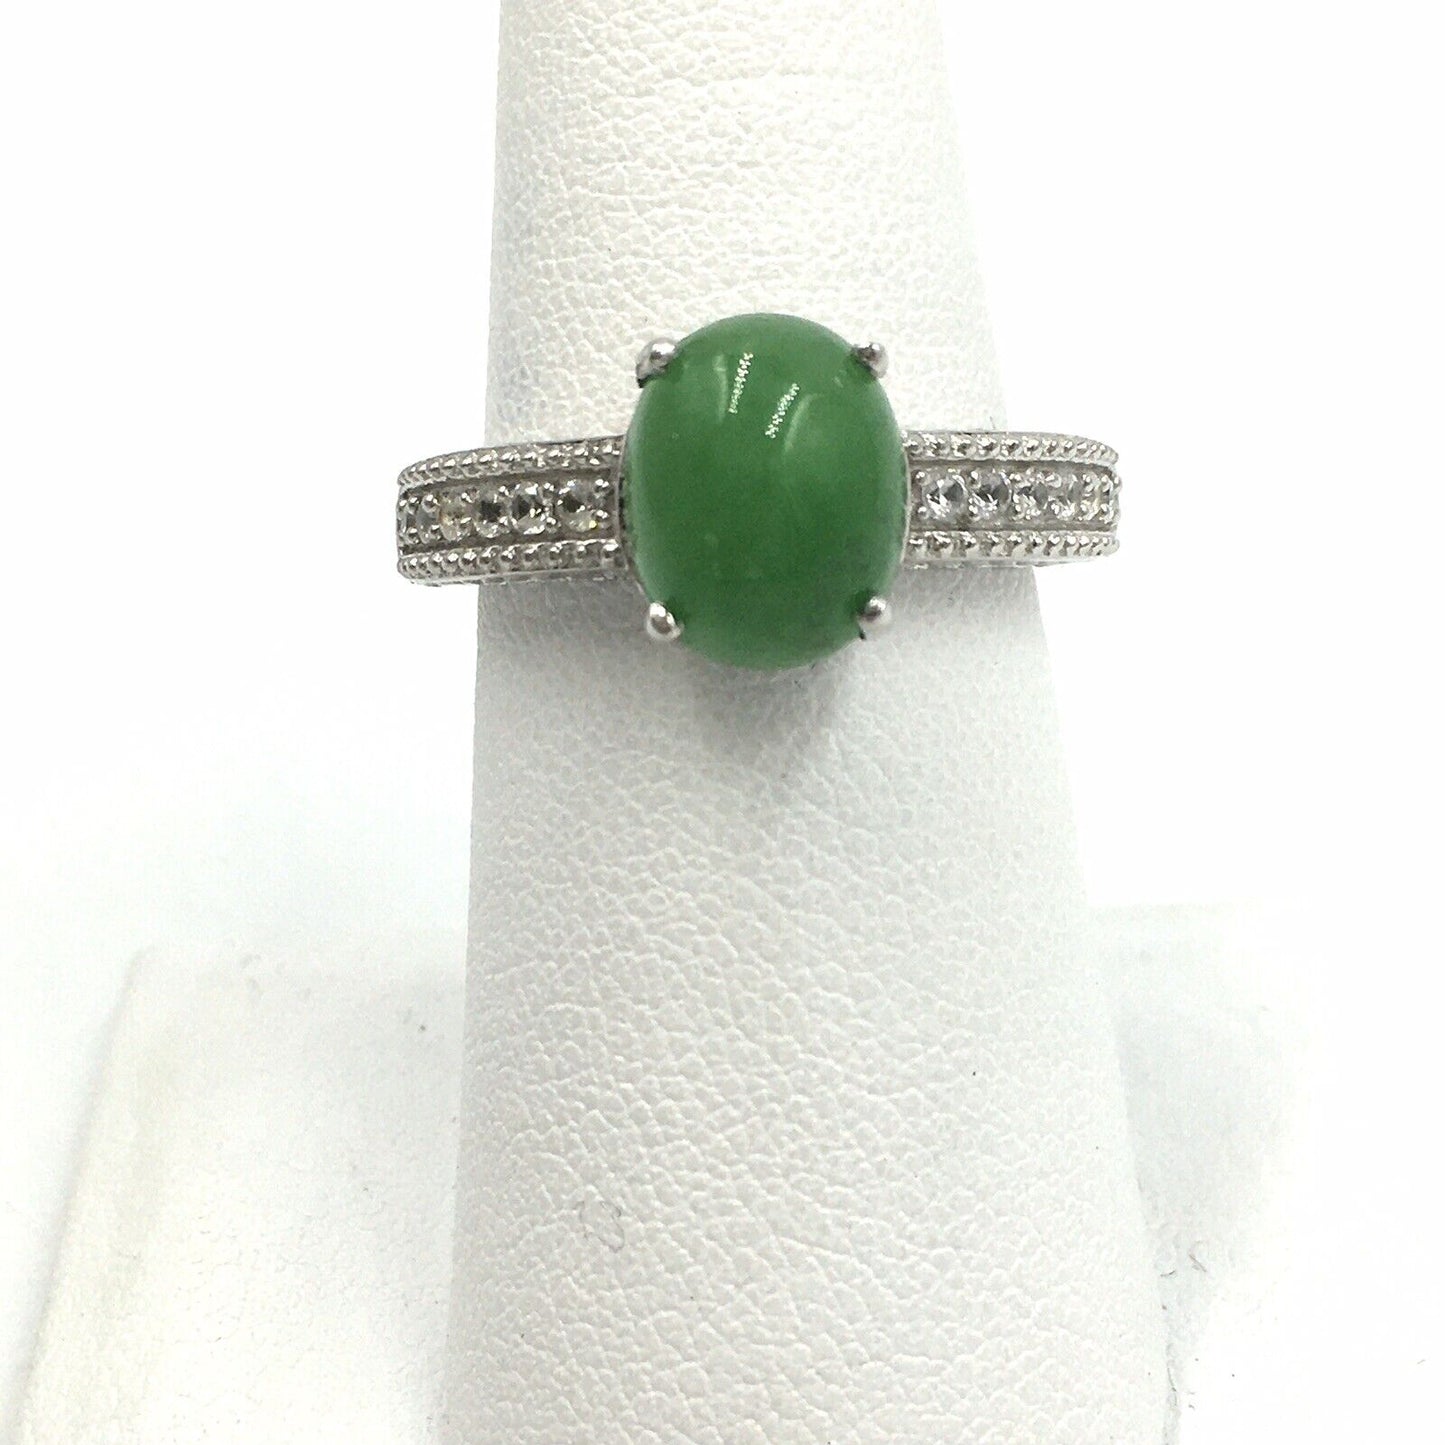 Sts Chuck Clemency Jade Spinel Sterling Silver Ring Size 7